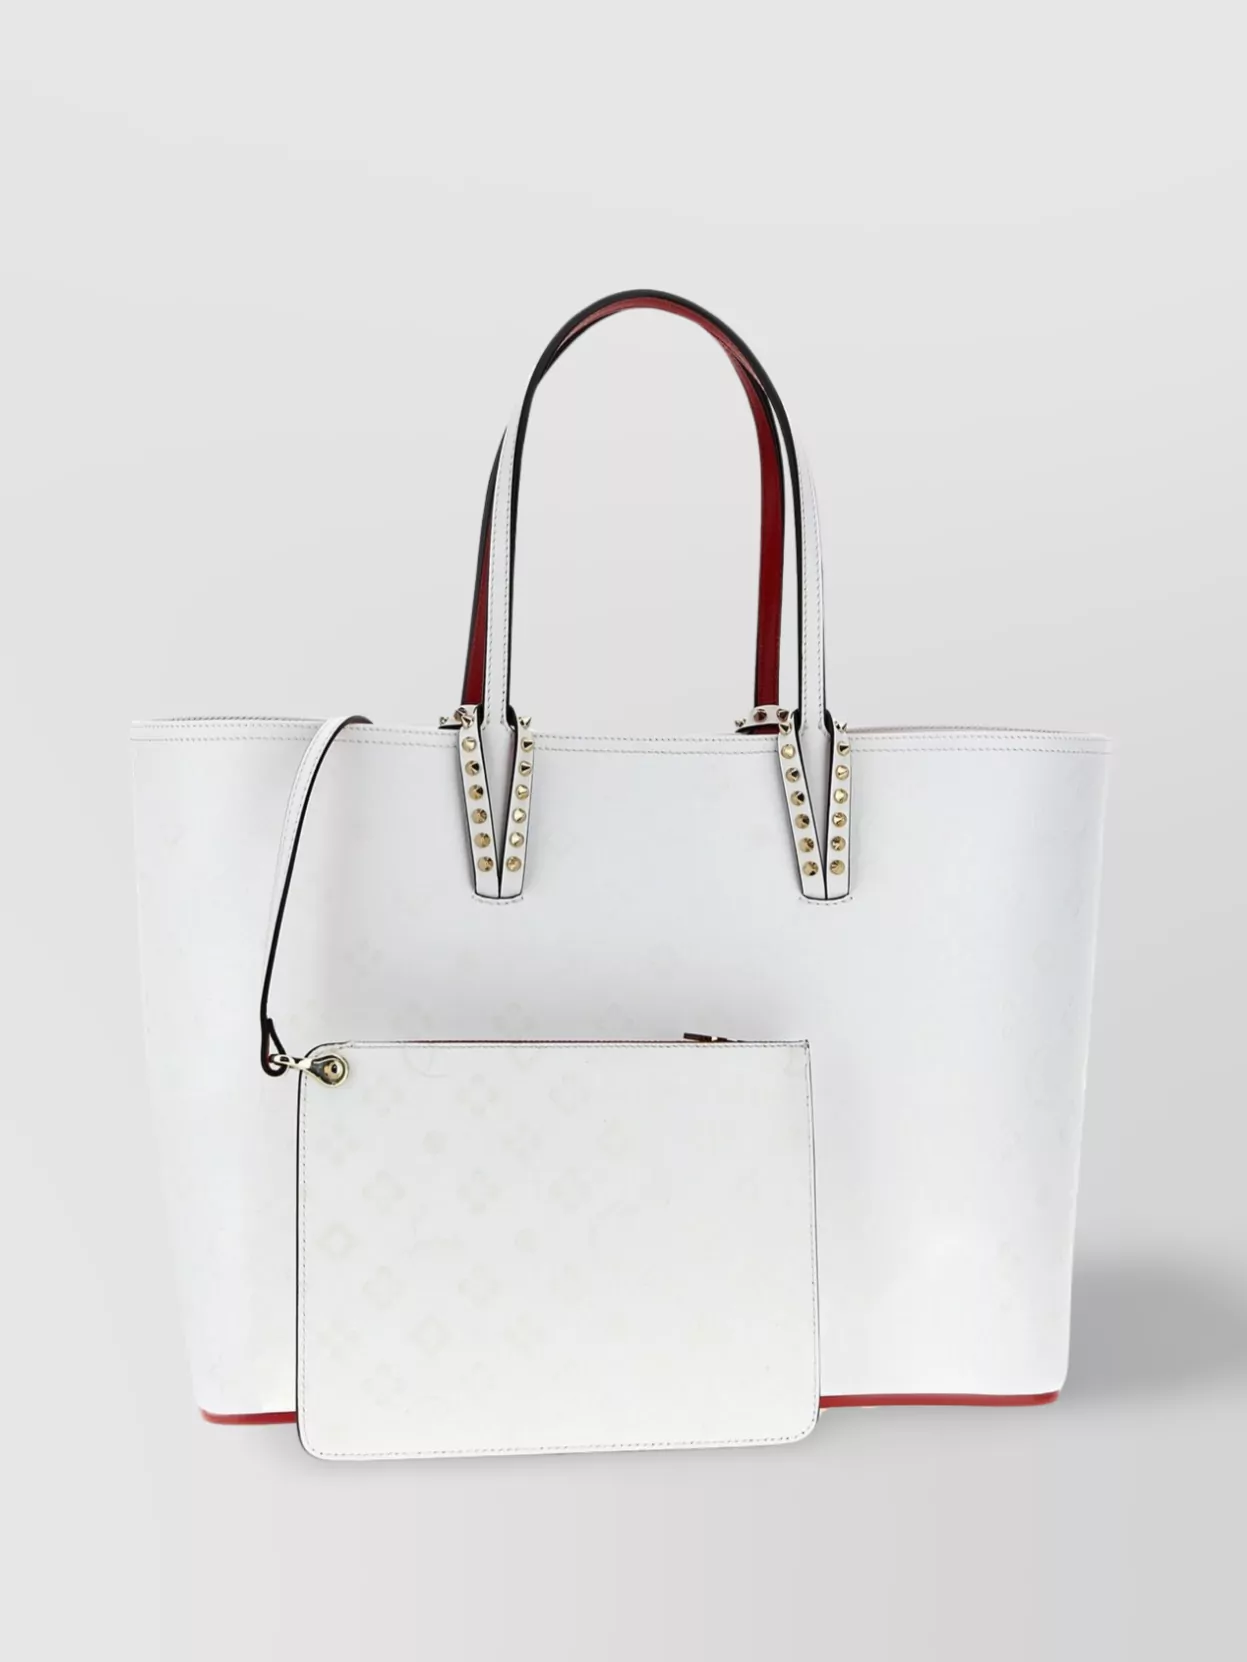 Christian Louboutin Studded Structured Tote Bag With Metal Hardware In White